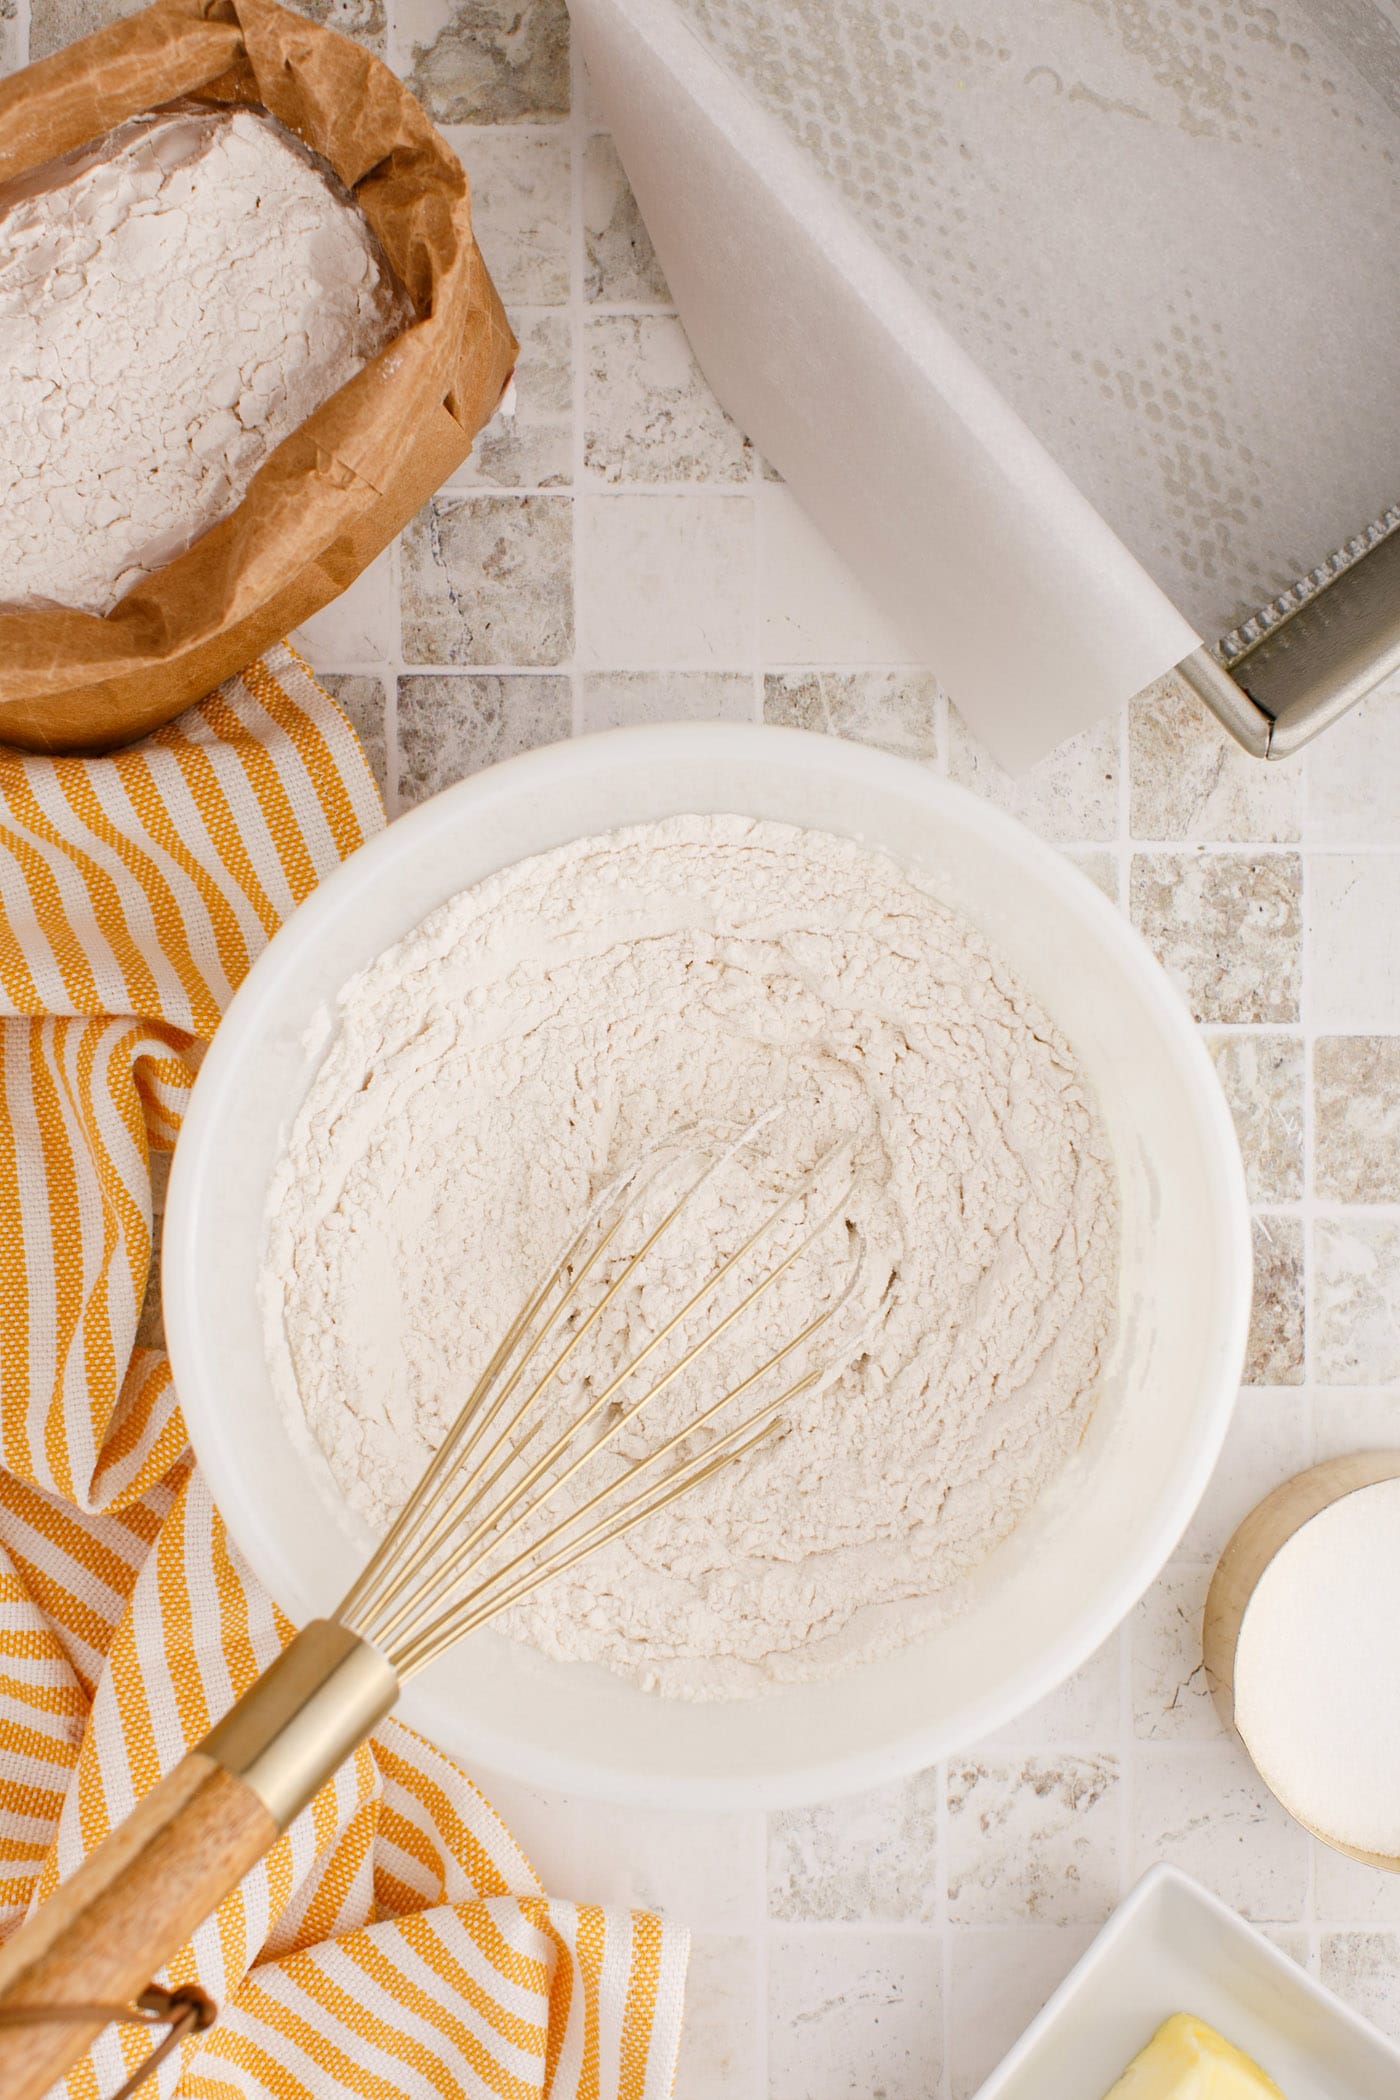 whisking the flour and dry ingredients for quick bread in a bowl